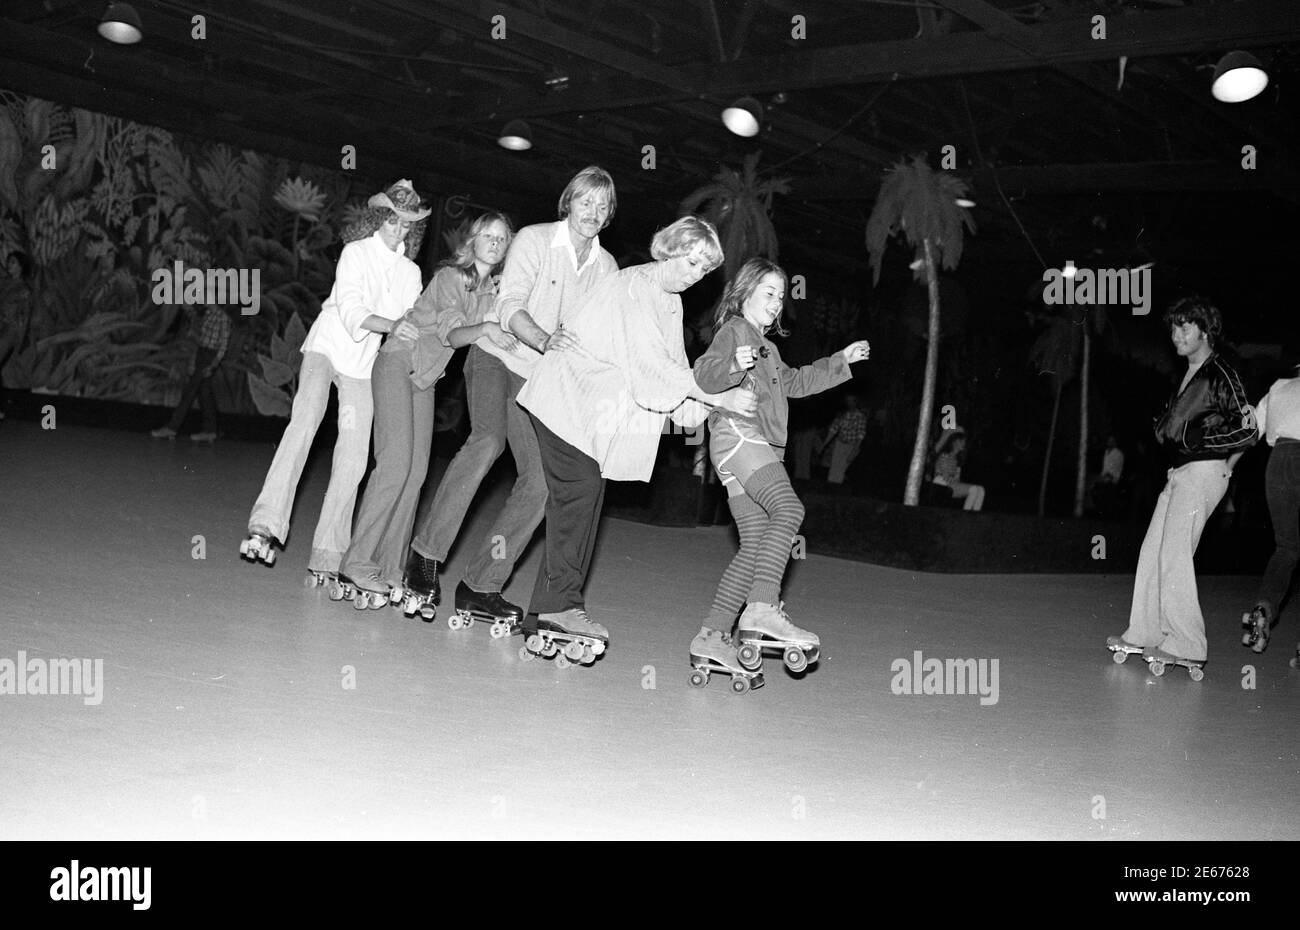 Actor Jon Voigt joins a line of skaters at Flippers Roller Rink  for event in support of ERA, Los Angeles, OCt. 29, 1978 Stock Photo